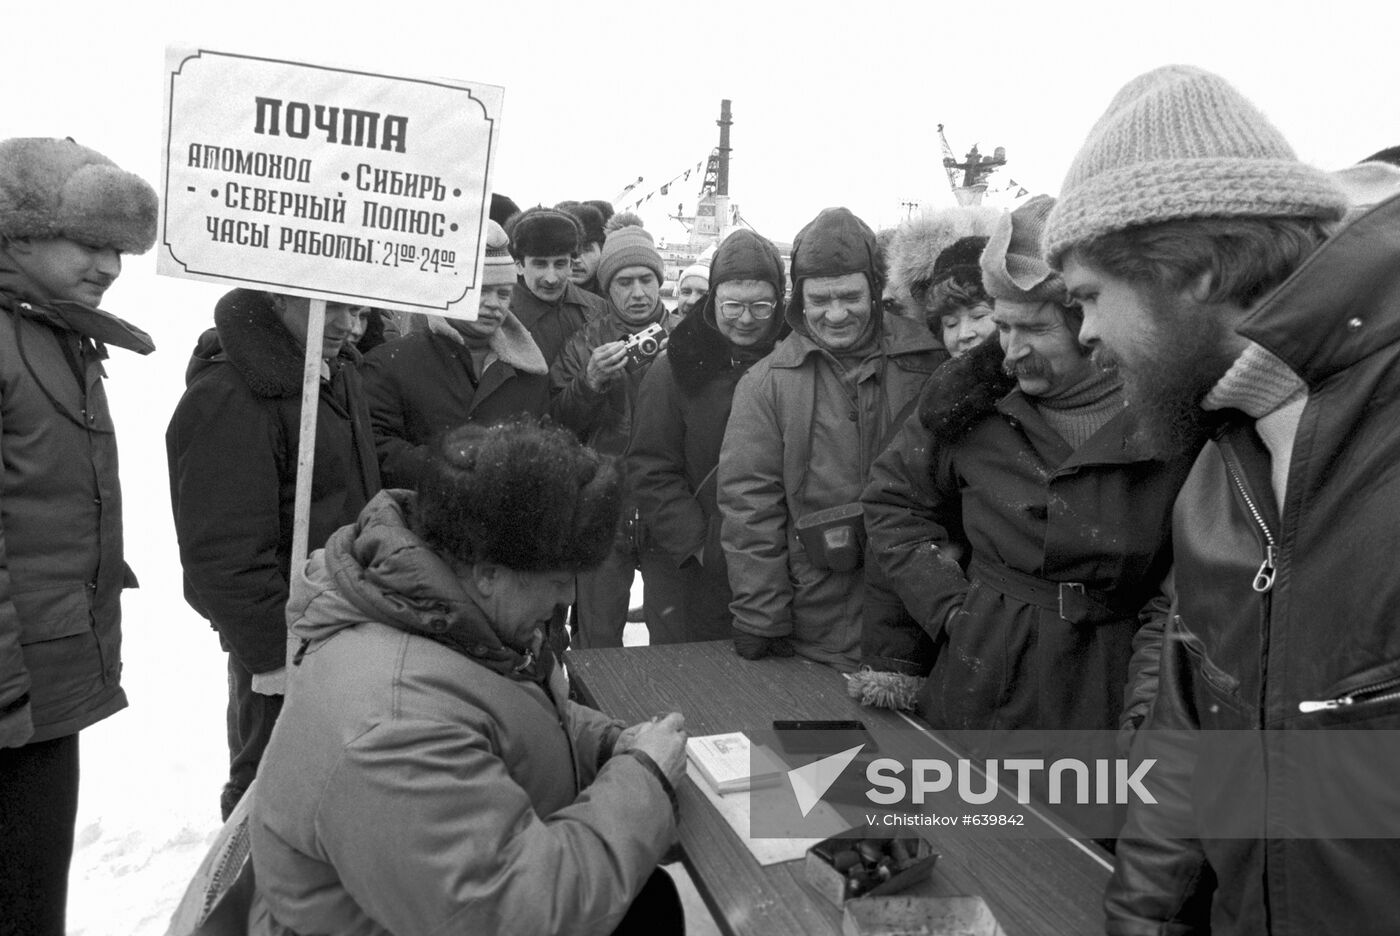 Members of expedition on nuclear ship "Sibir"